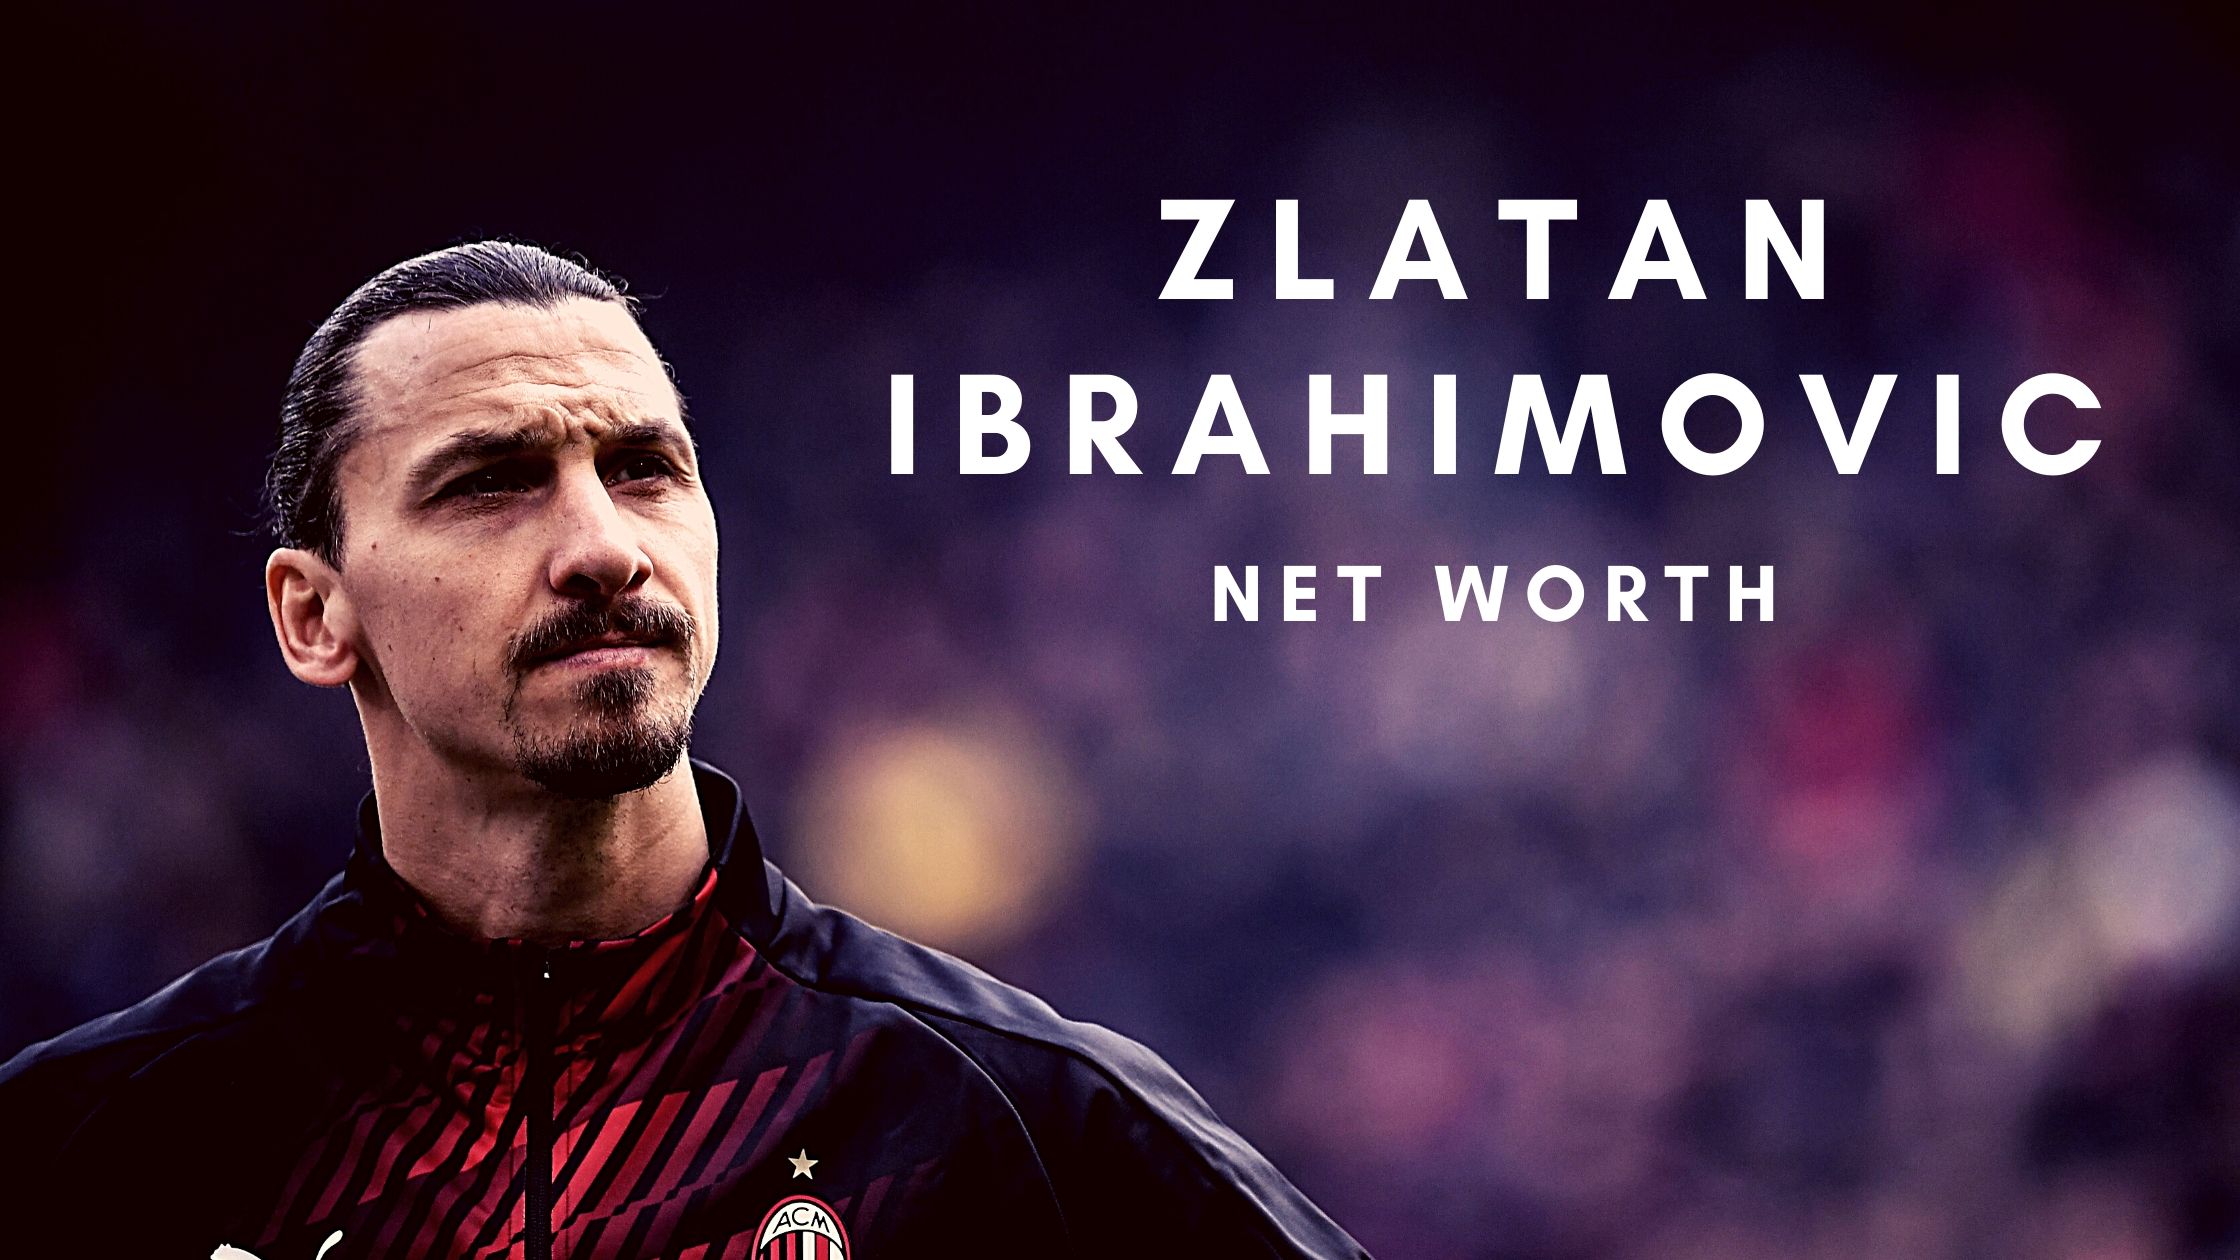 Zlatan Ibrahimovic is one of the biggest names in football and here is all about his net worth and more